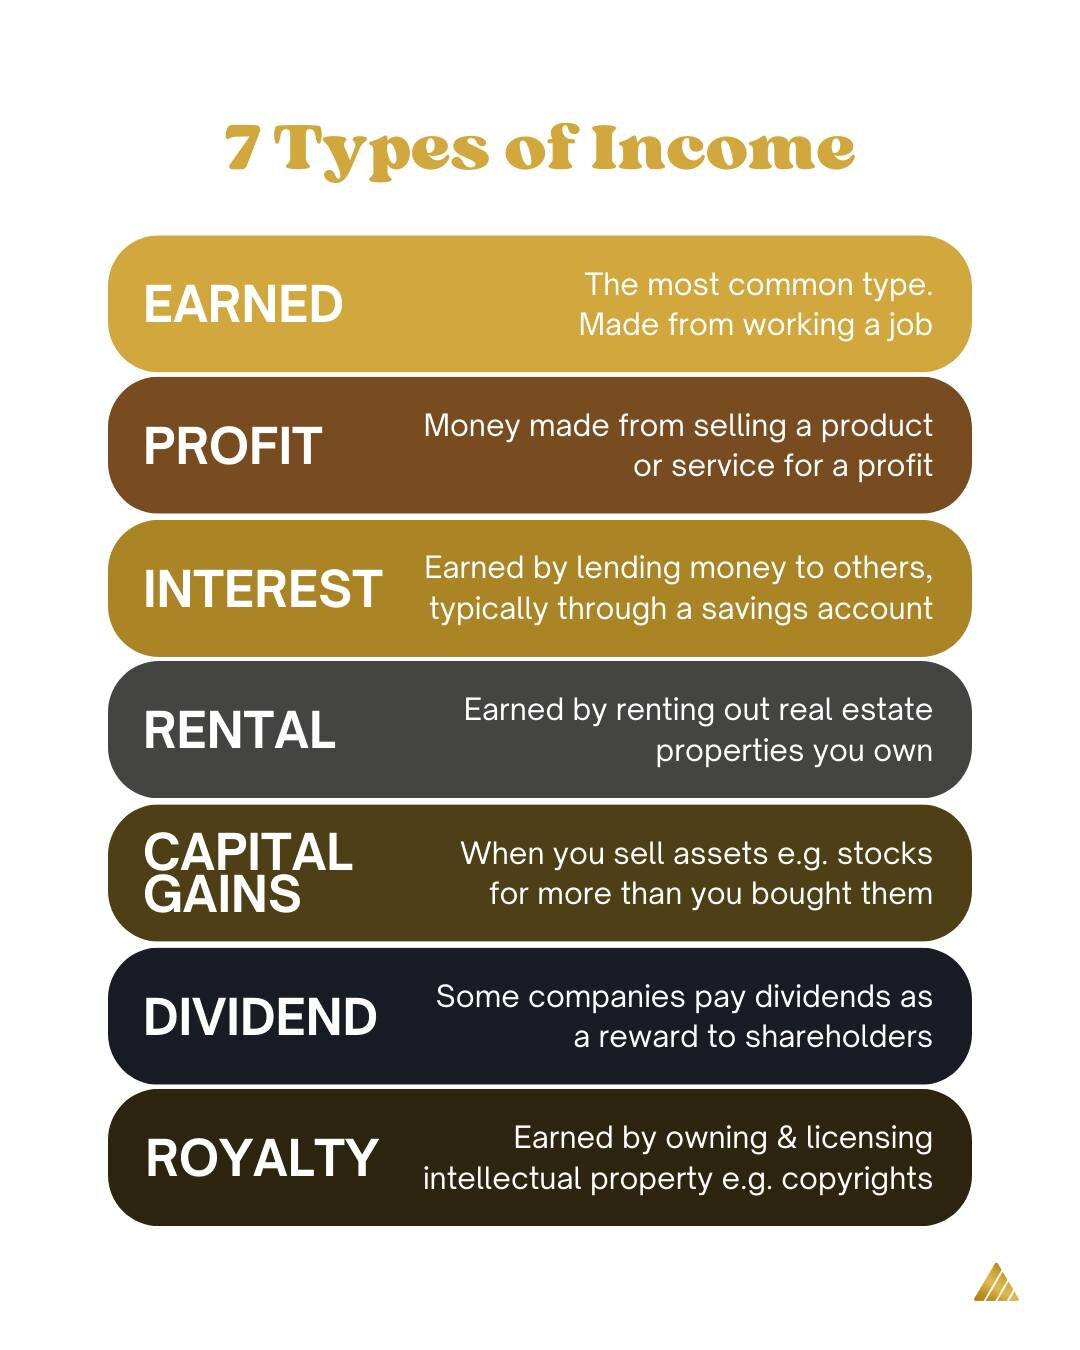 Diversify your streams! 🌟

From earned to royalty, mastering the 7 types of income can help secure your financial future.

Are you leveraging all seven? Let's amplify your portfolio with strategic planning. 🚀

See link in bio to book a free consult